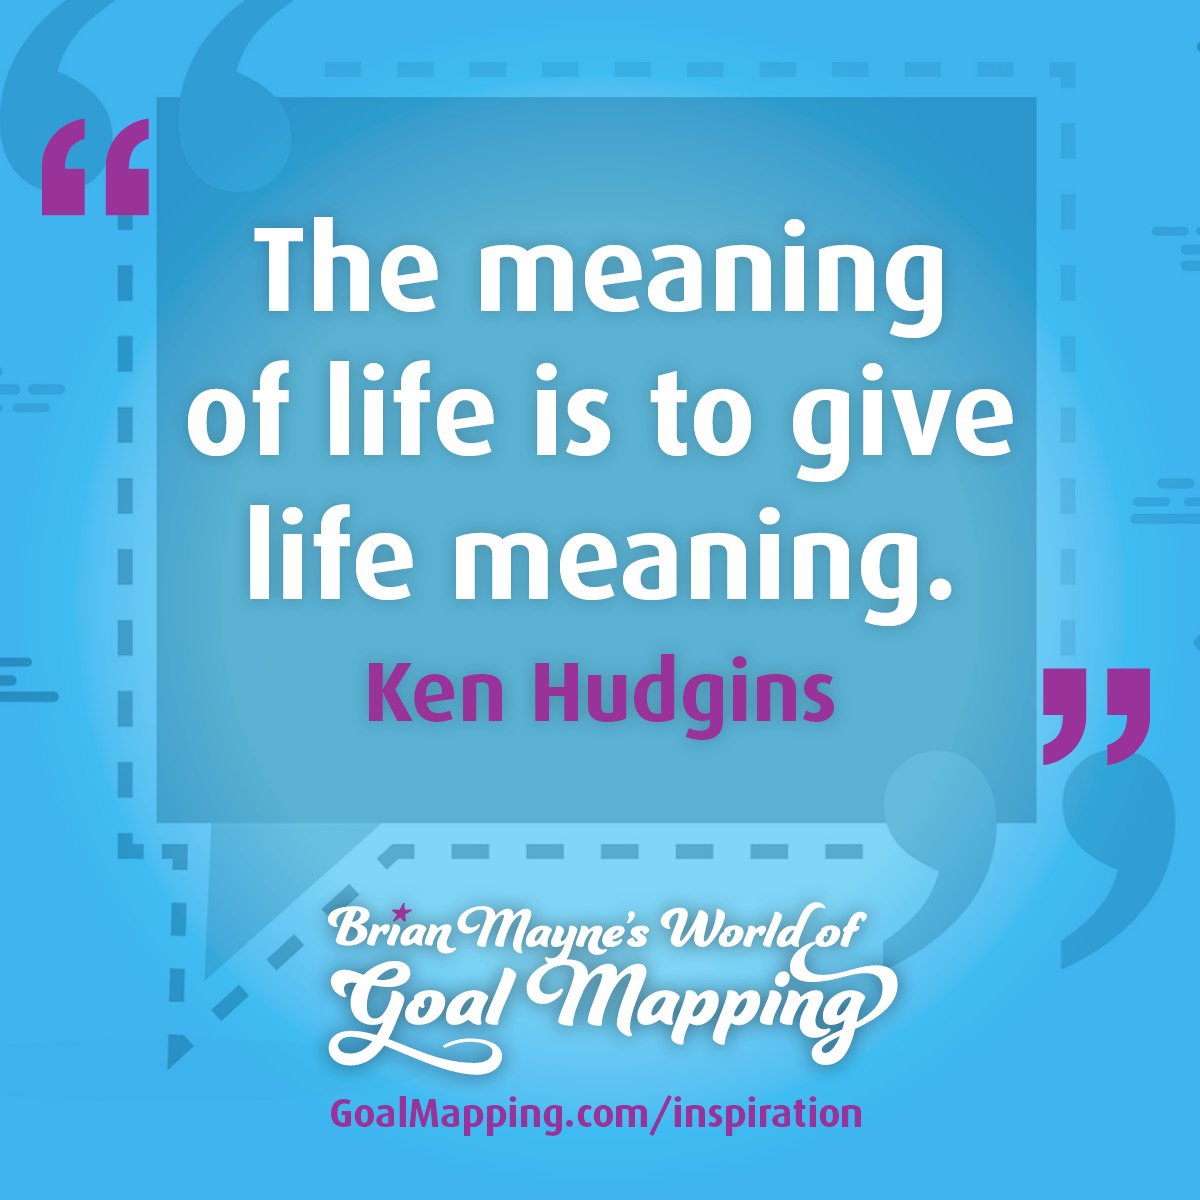 "The meaning of life is to give life meaning." Ken Hudgins